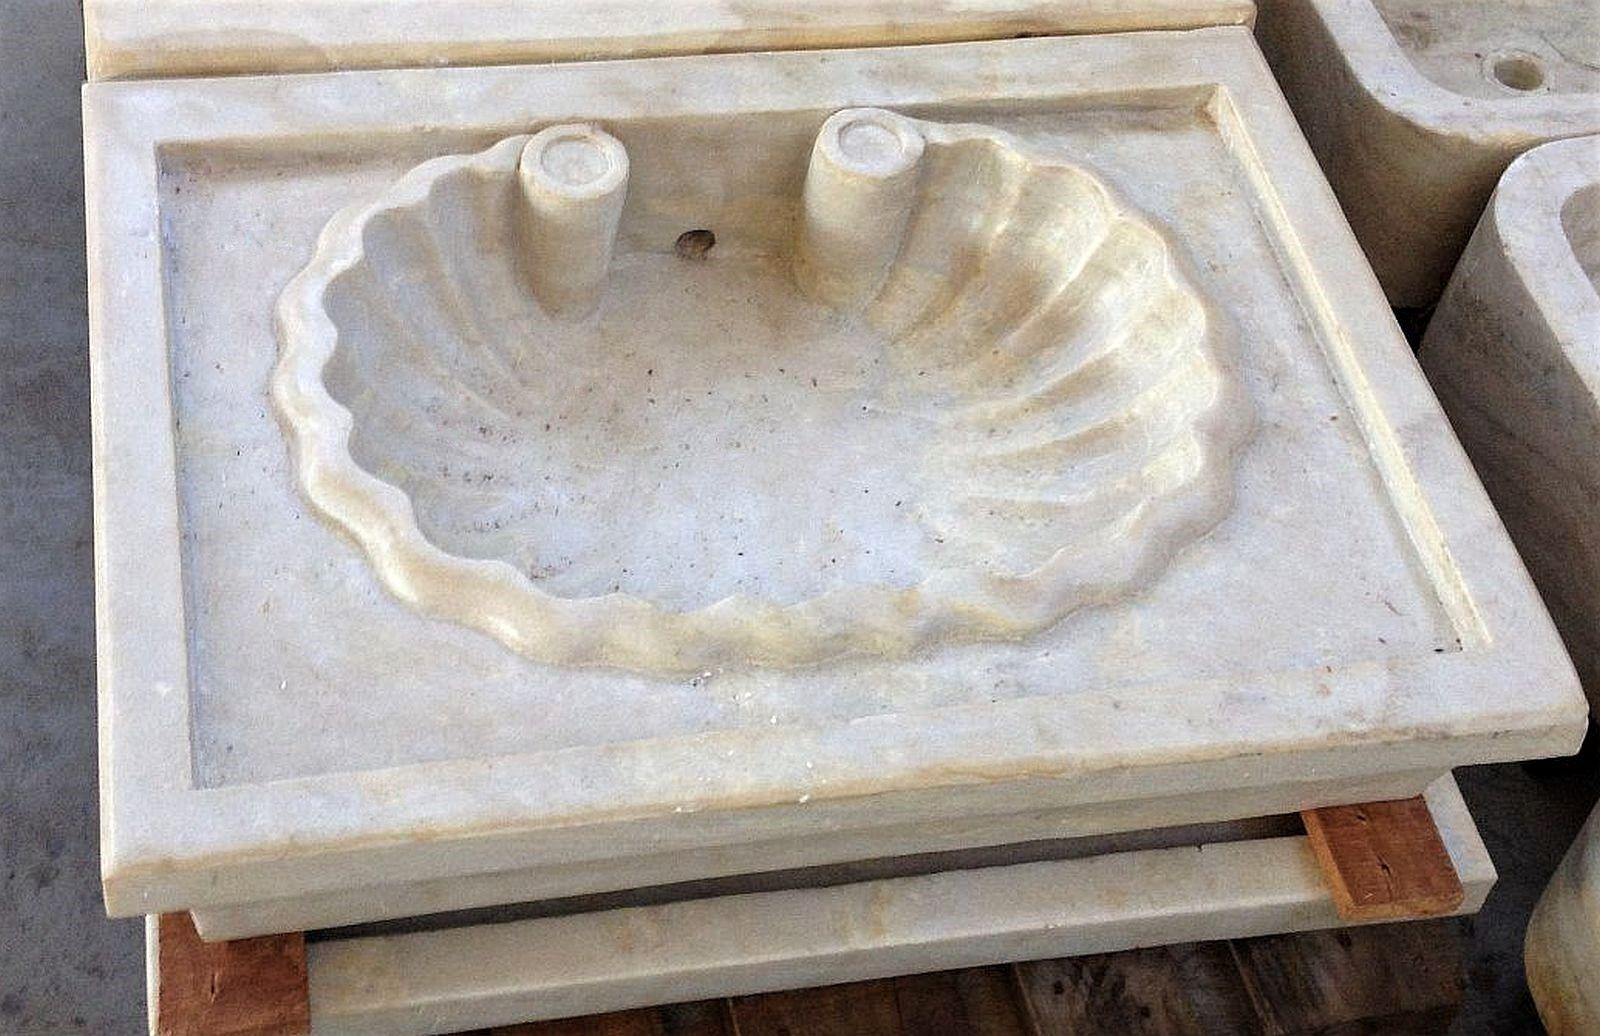 This timeless beautiful Italian classical sink is cut from one single block of white Carrara marble, the design with a set in shell style is taken from Greek and Roman times, the piece carries superb artistic merit easily fitting in with old and new